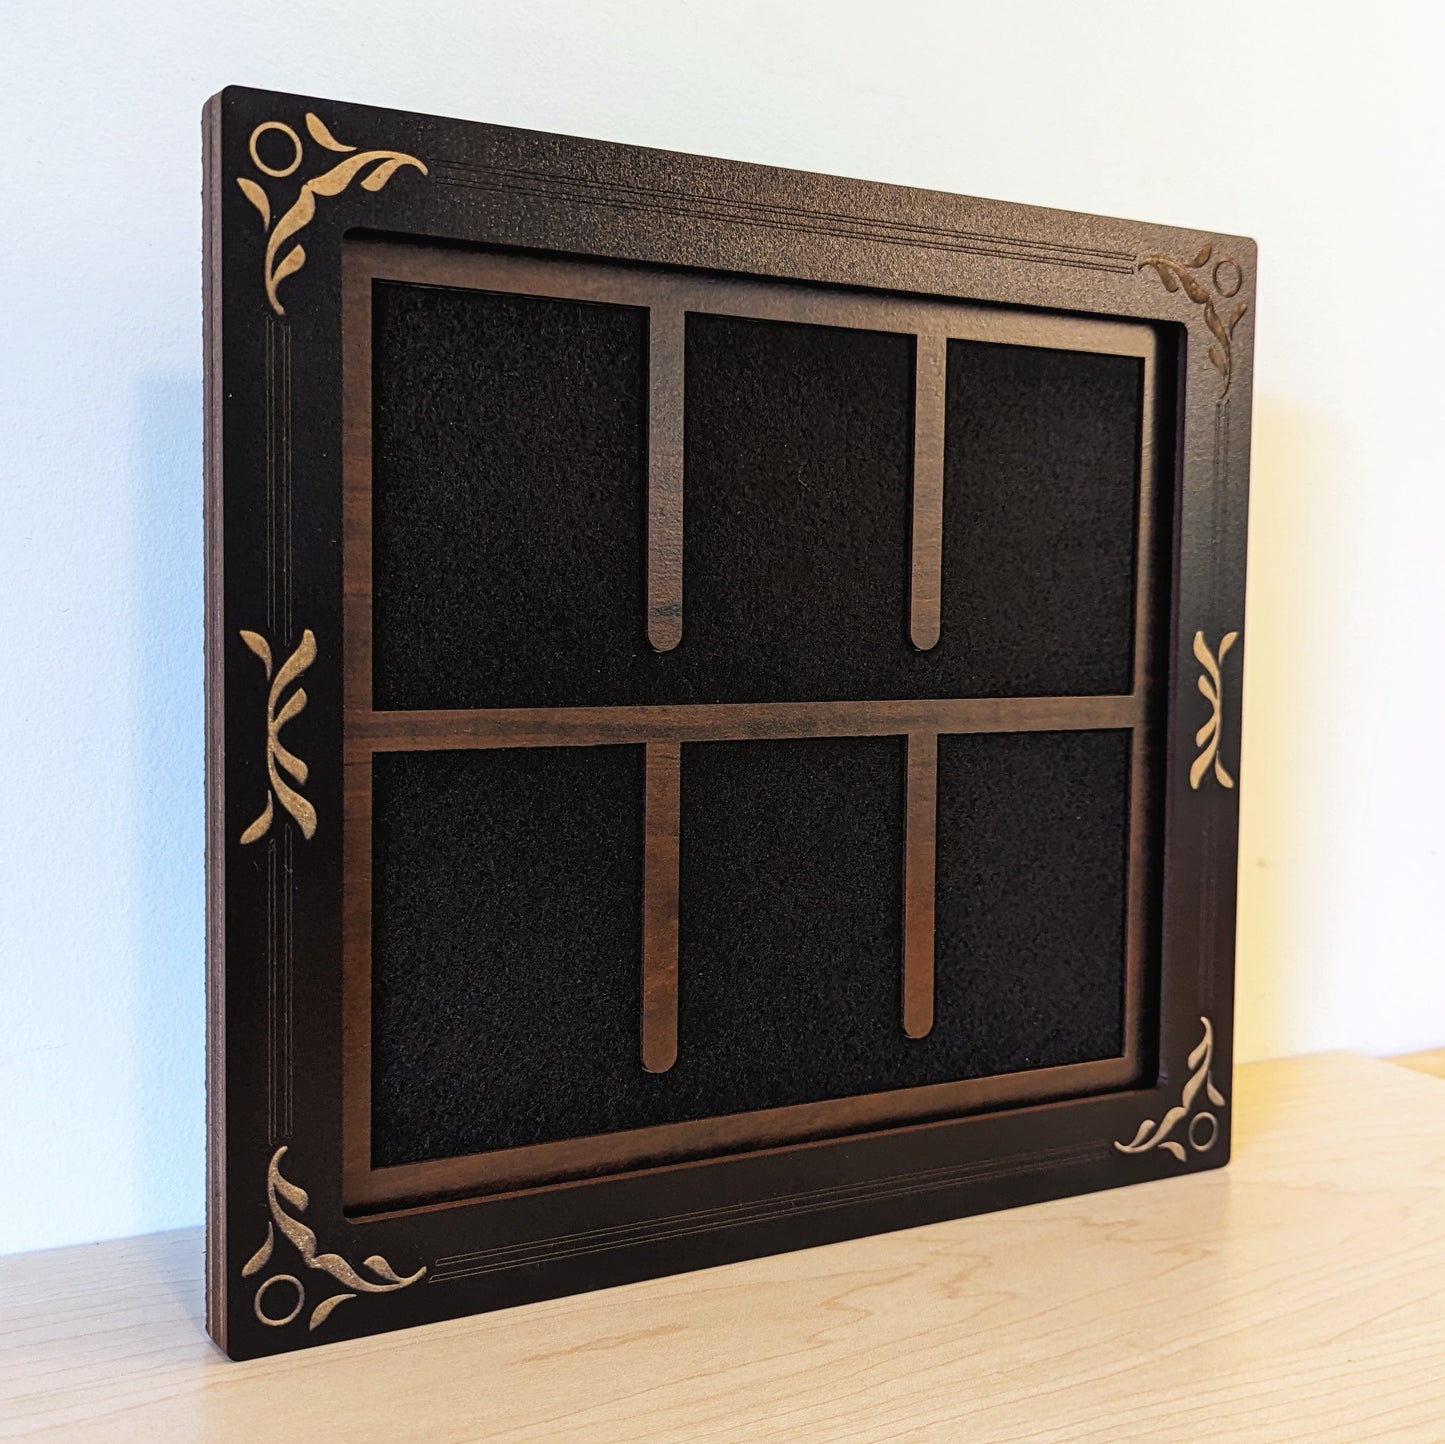 playing card 6-slot display frame, fits cards in standard card sleeves, great for magic the gathering, mistborn cards from Brandon sanderson, pokemon, and more